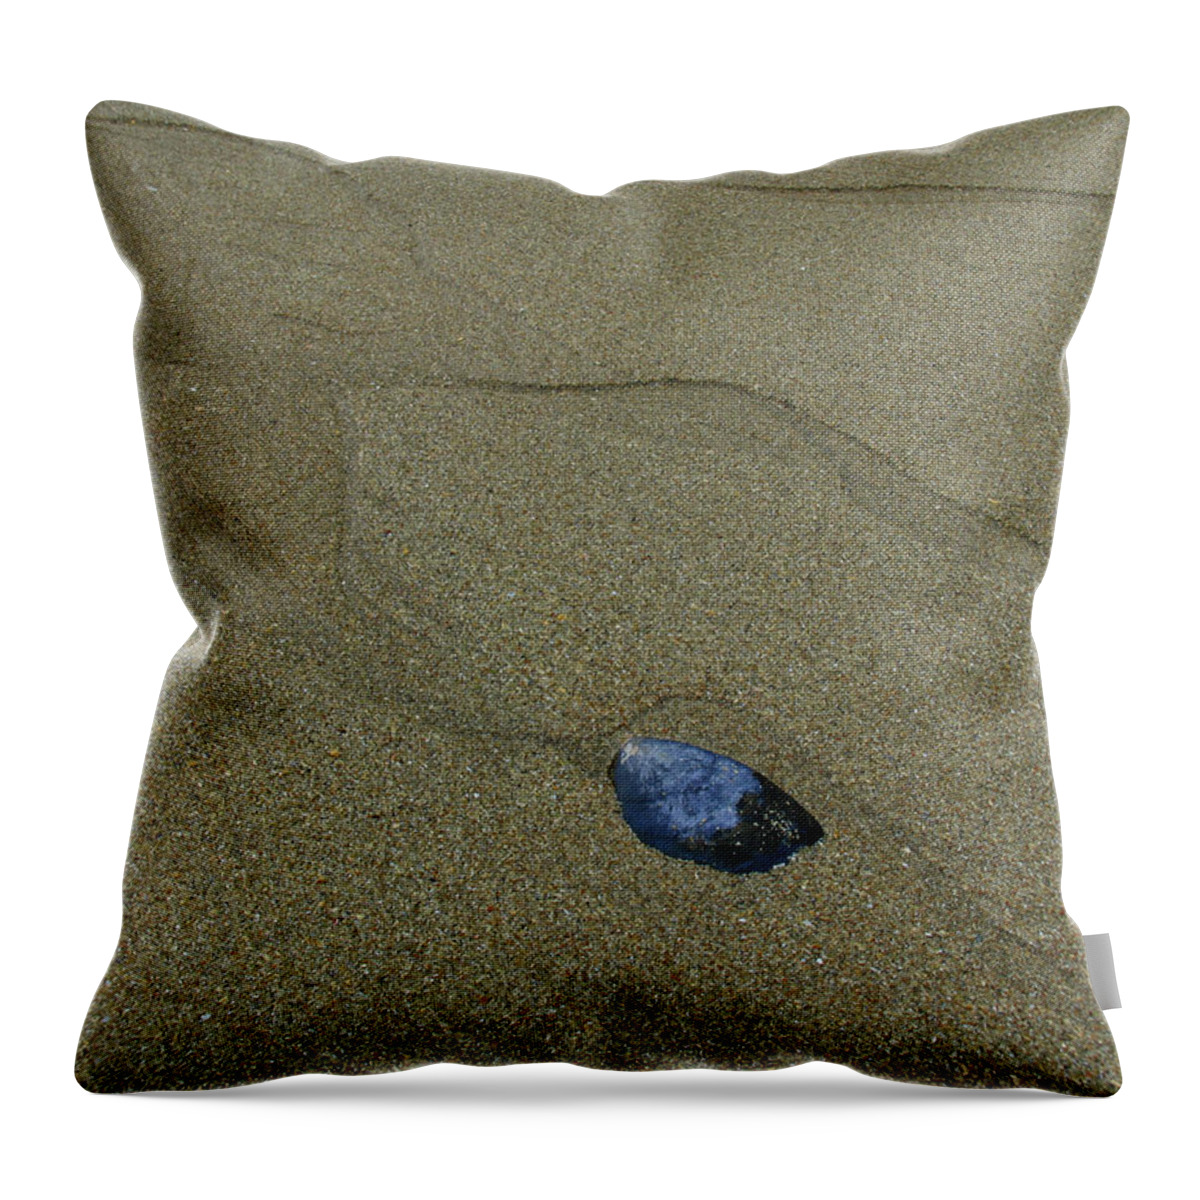 Acadia Np Throw Pillow featuring the photograph Acadia Sand Beach by Juergen Roth